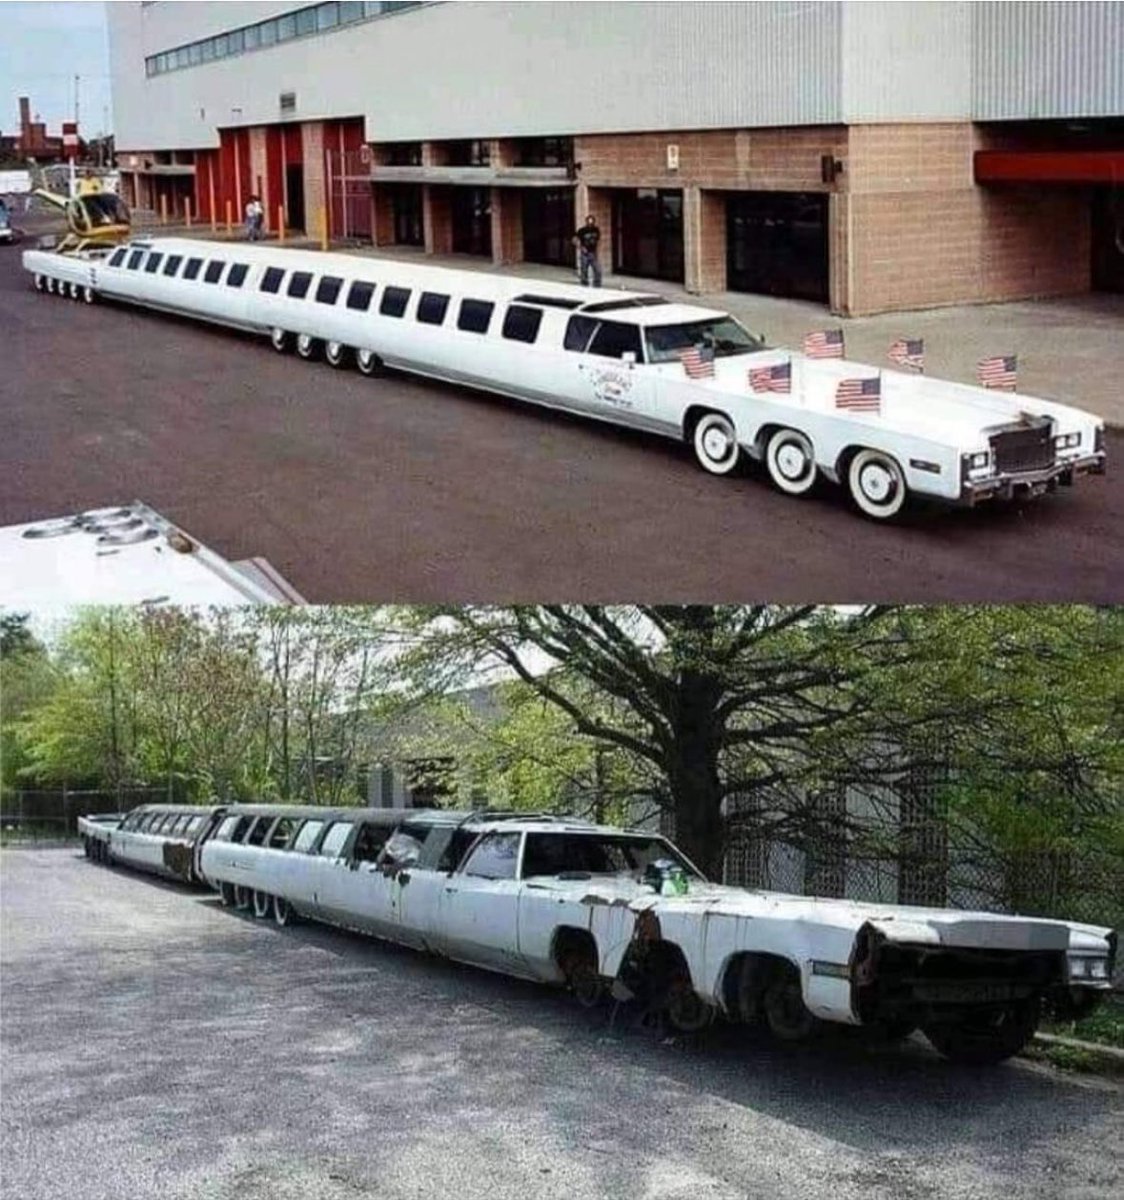 The worlds longest limousine, then and now✌️(1986)📸